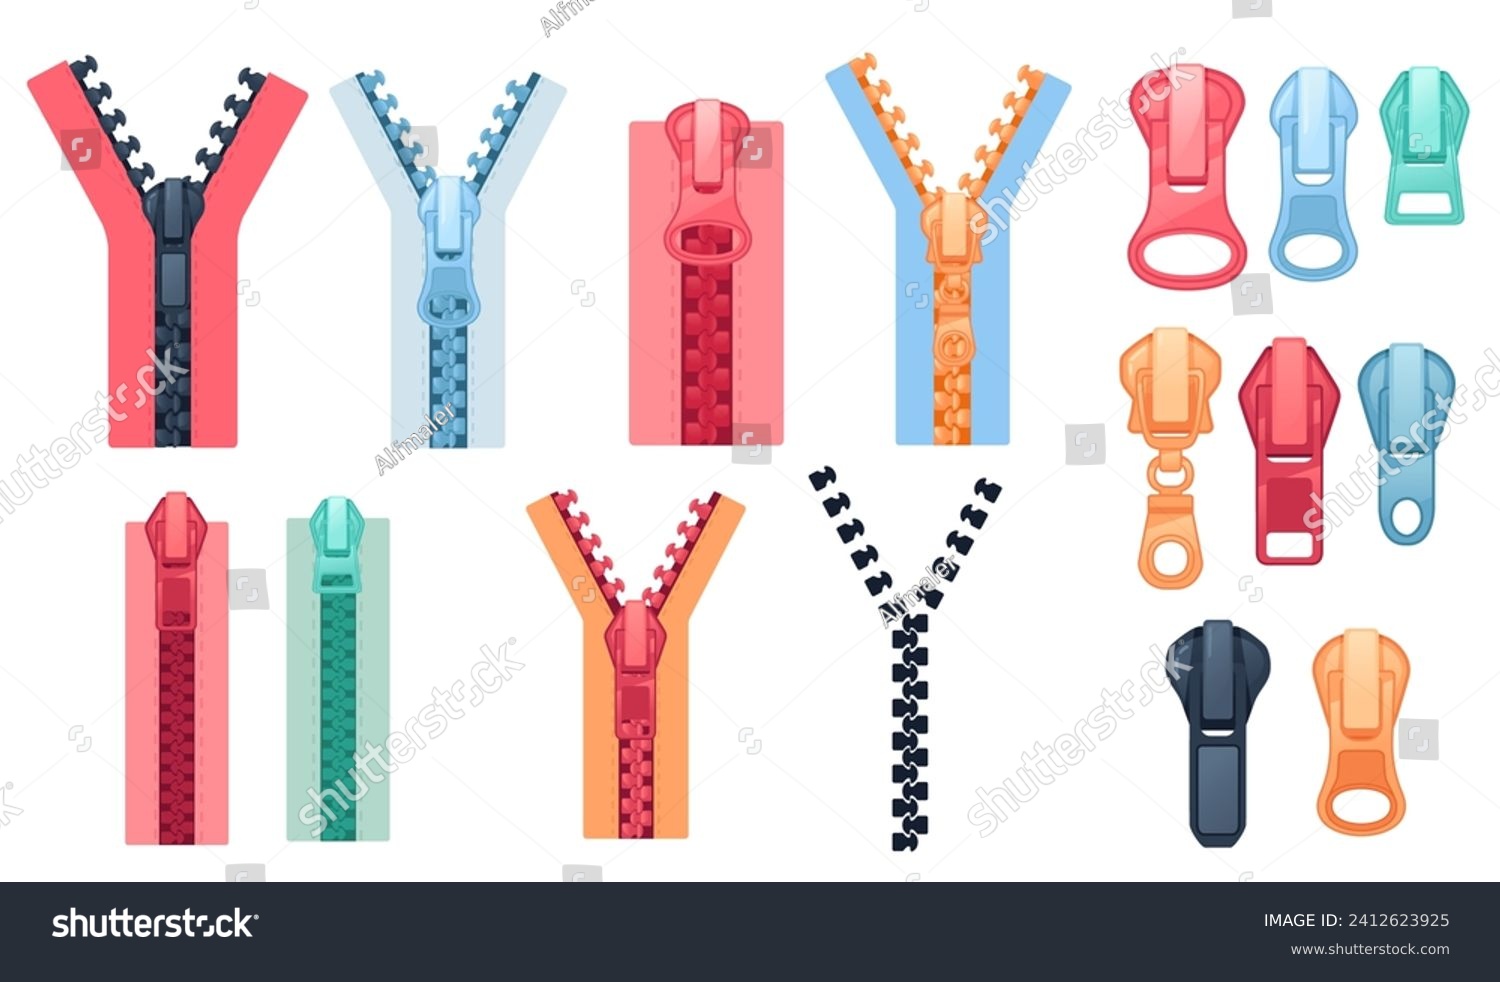 SVG of Set of fastener puller and zippers clothing textile accessories vector illustration isolated on white background svg